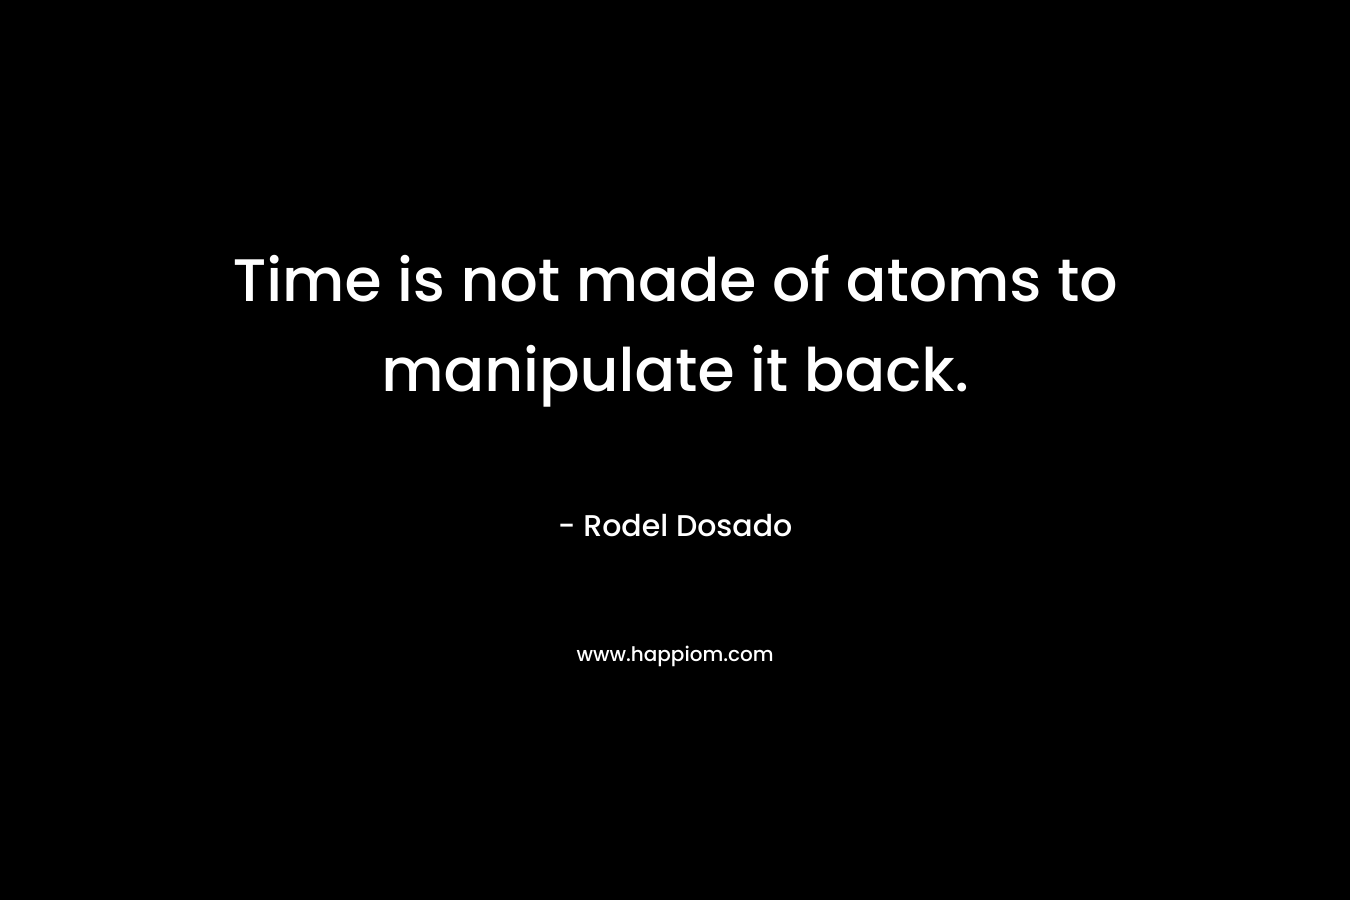 Time is not made of atoms to manipulate it back.